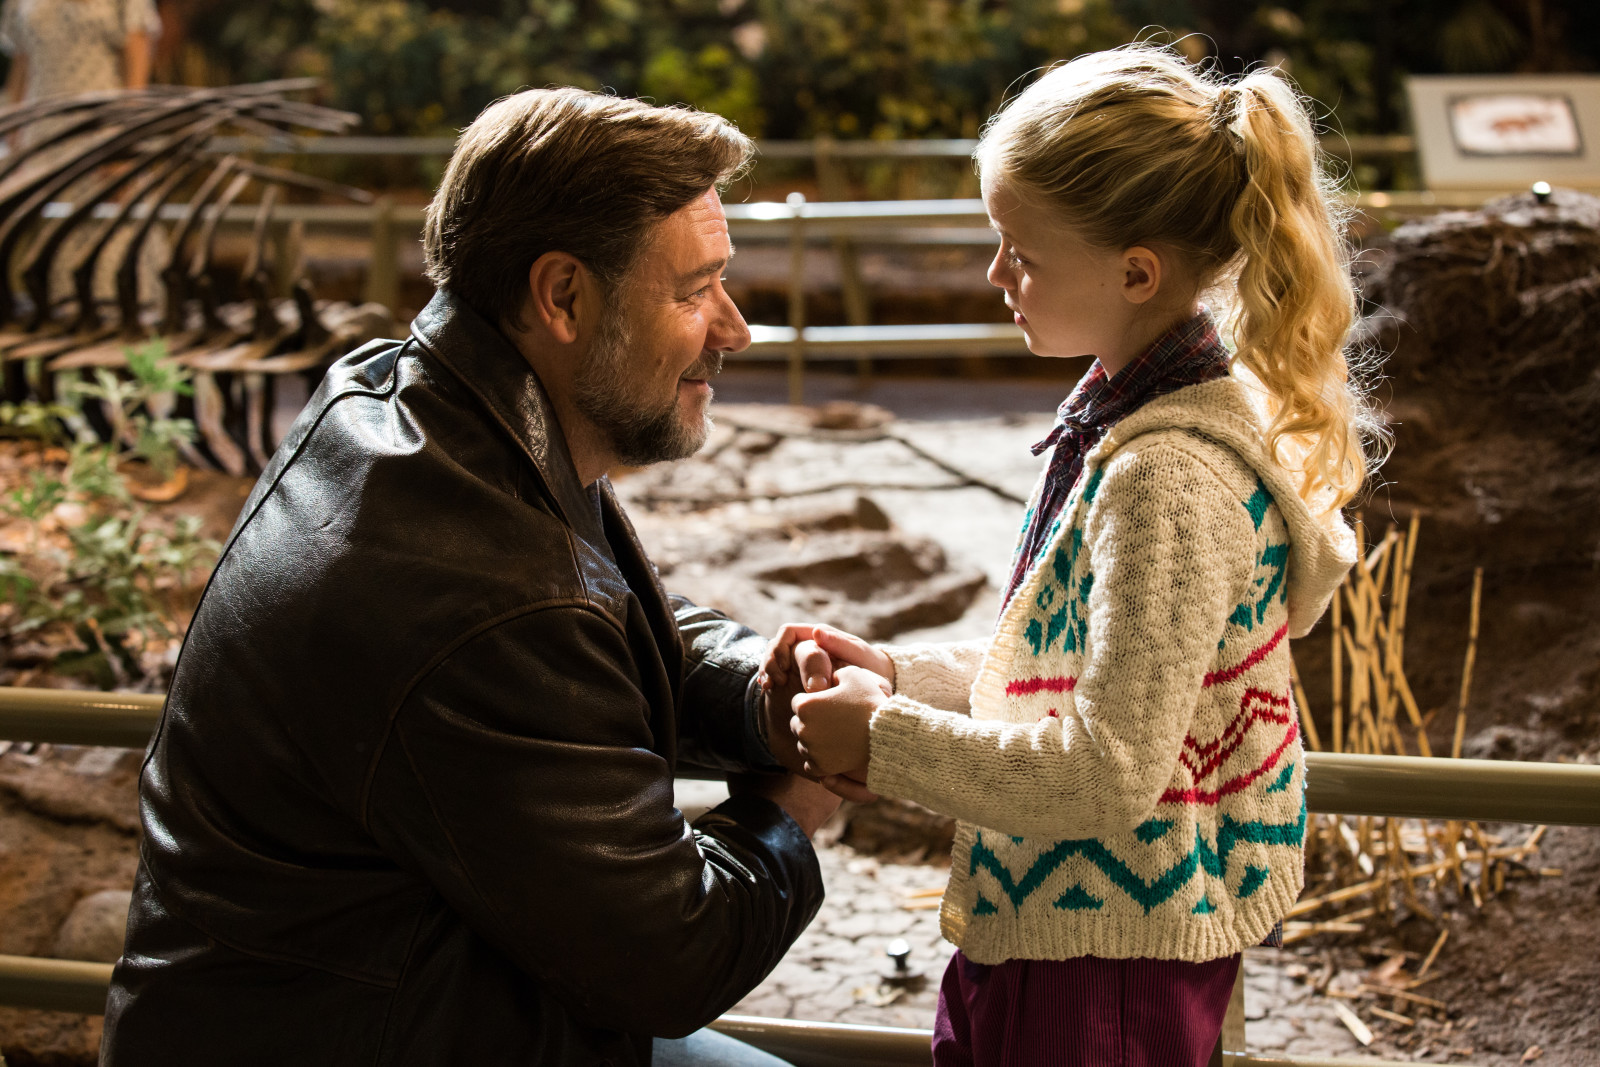 Fathers And Daughters HD wallpapers, Desktop wallpaper - most viewed